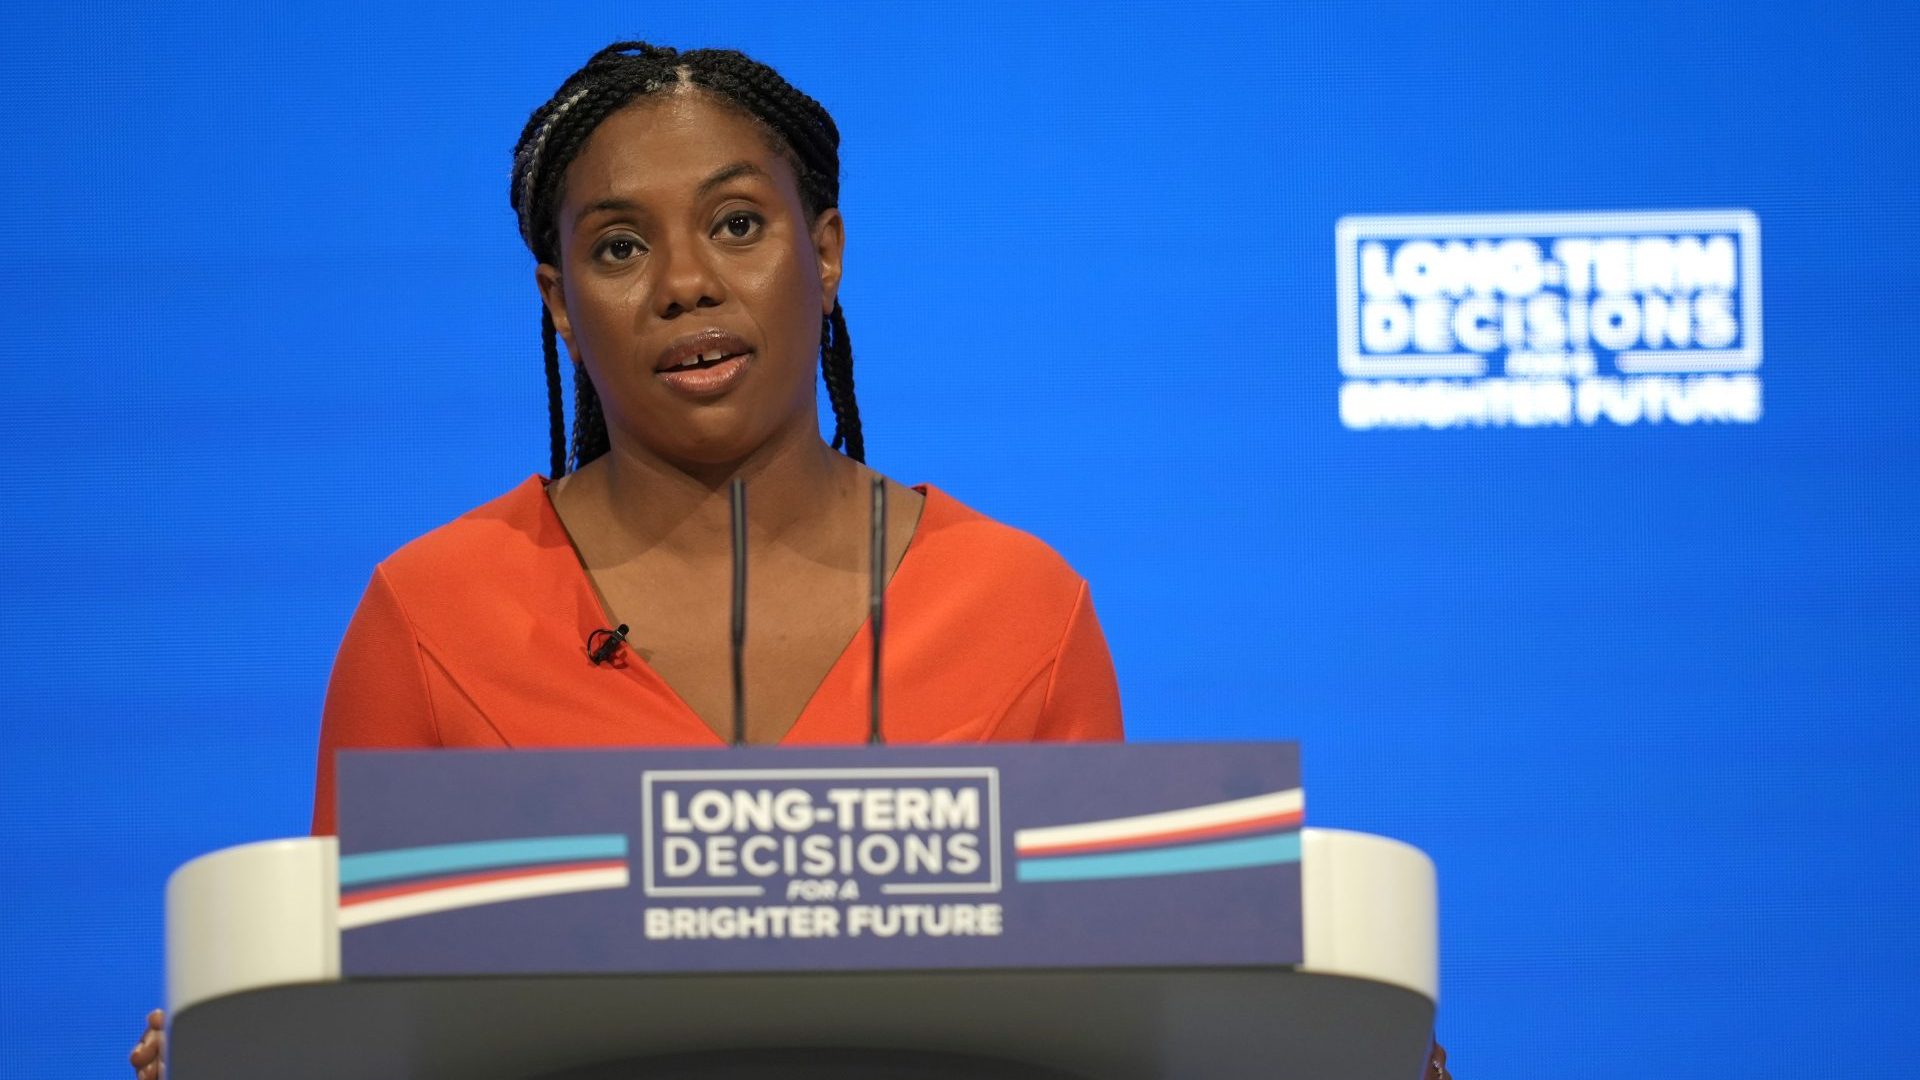  Kemi Badenoch MP, Secretary of State for Business and Trade speaks during the second day of the the Conservative Party Conference. Photo: Christopher Furlong/Getty Images